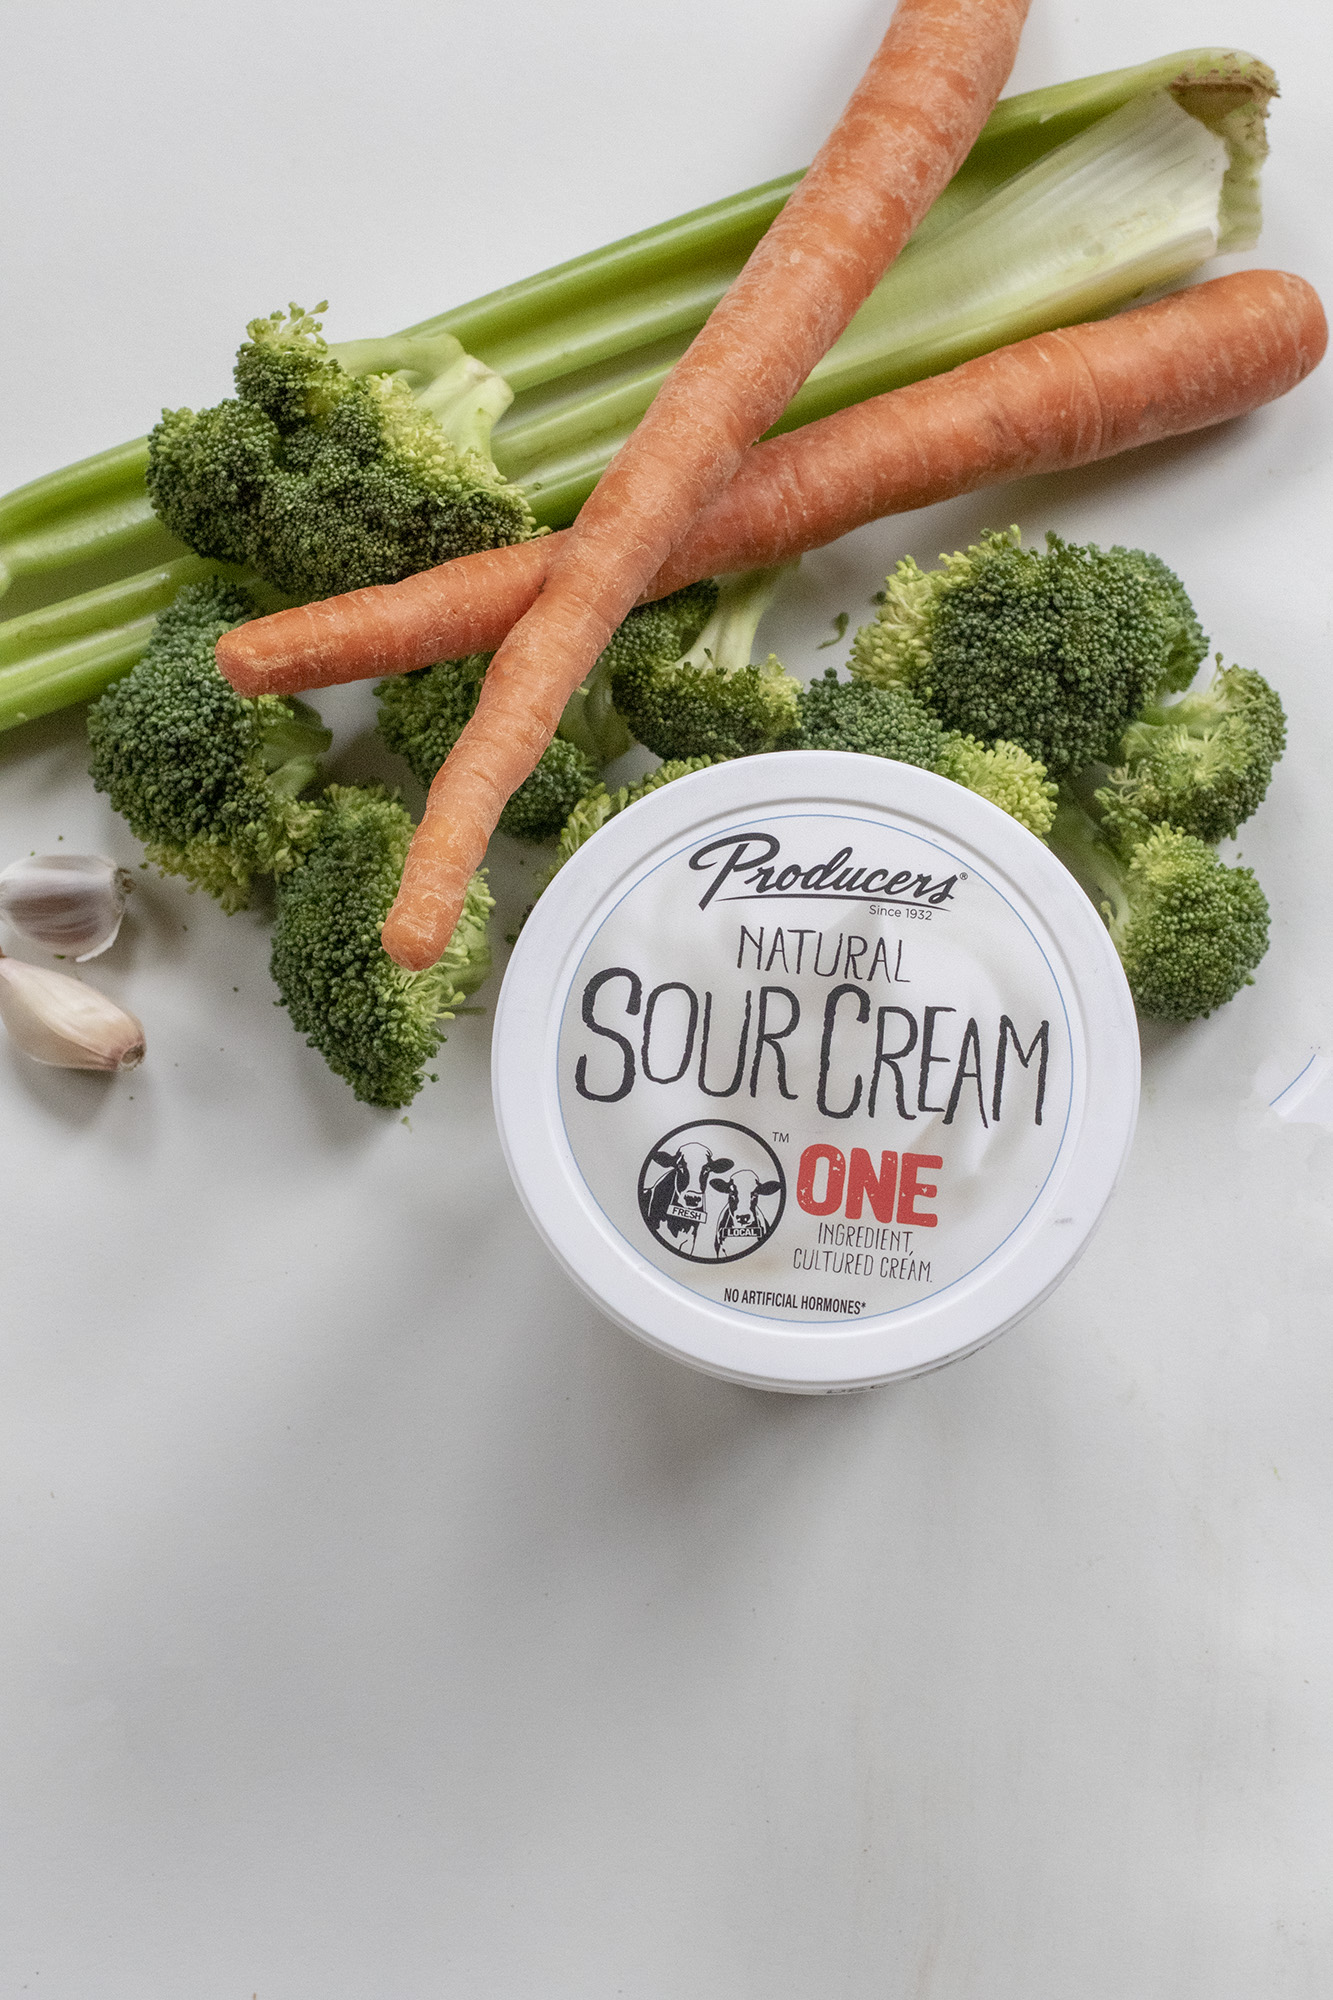 Producers Natural Sour Cream container surrounded by celery, carrots, broccoli and garlic laying flat on a white background.